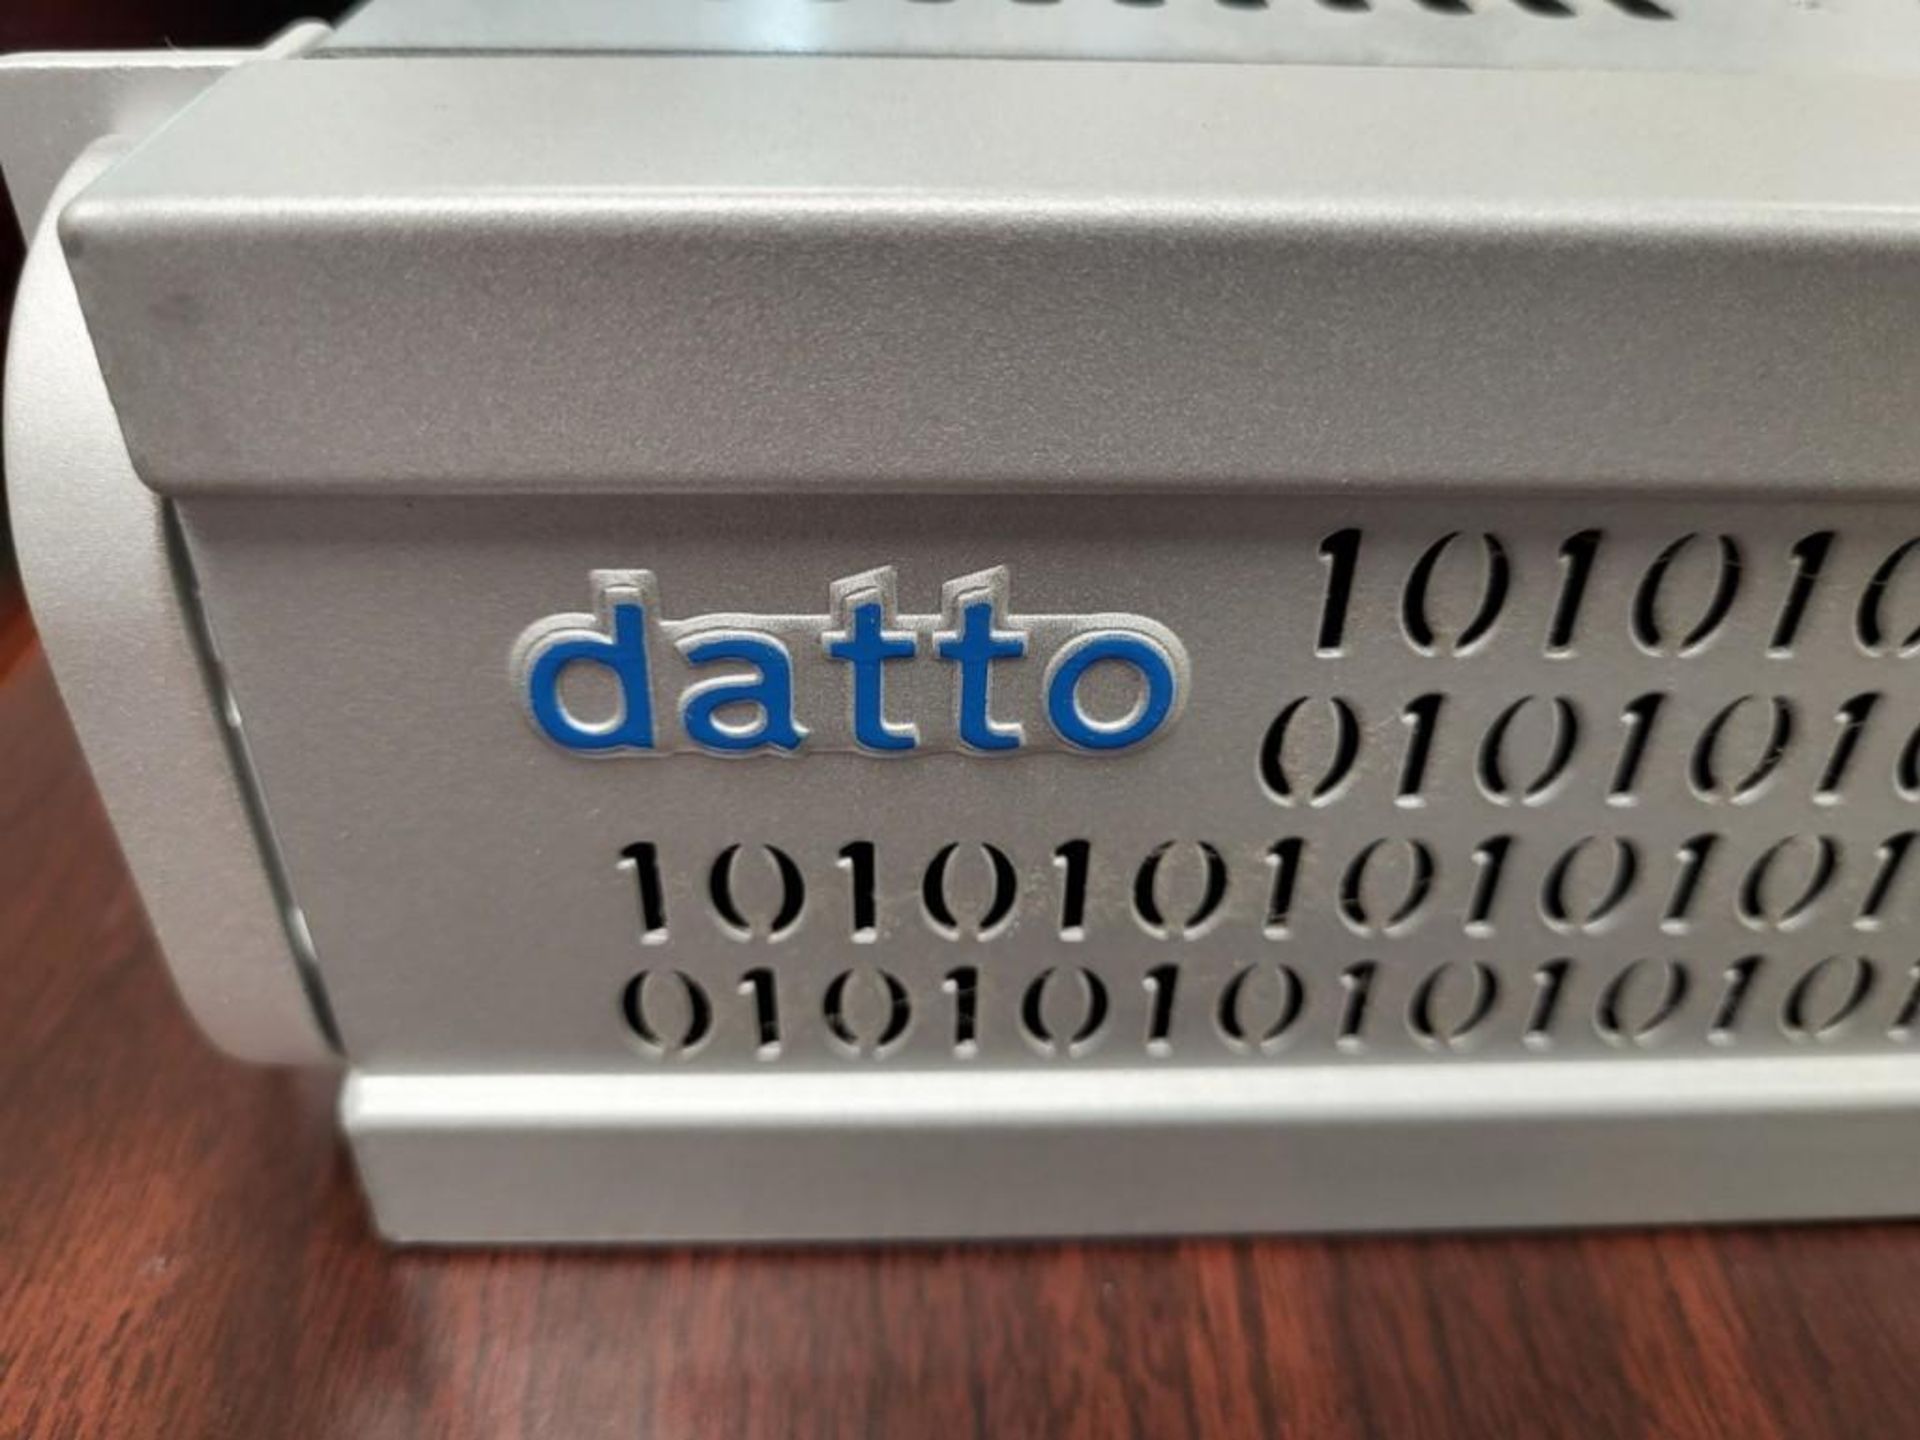 Datto model SP3000 Server and Data Storage Unit - Image 3 of 4